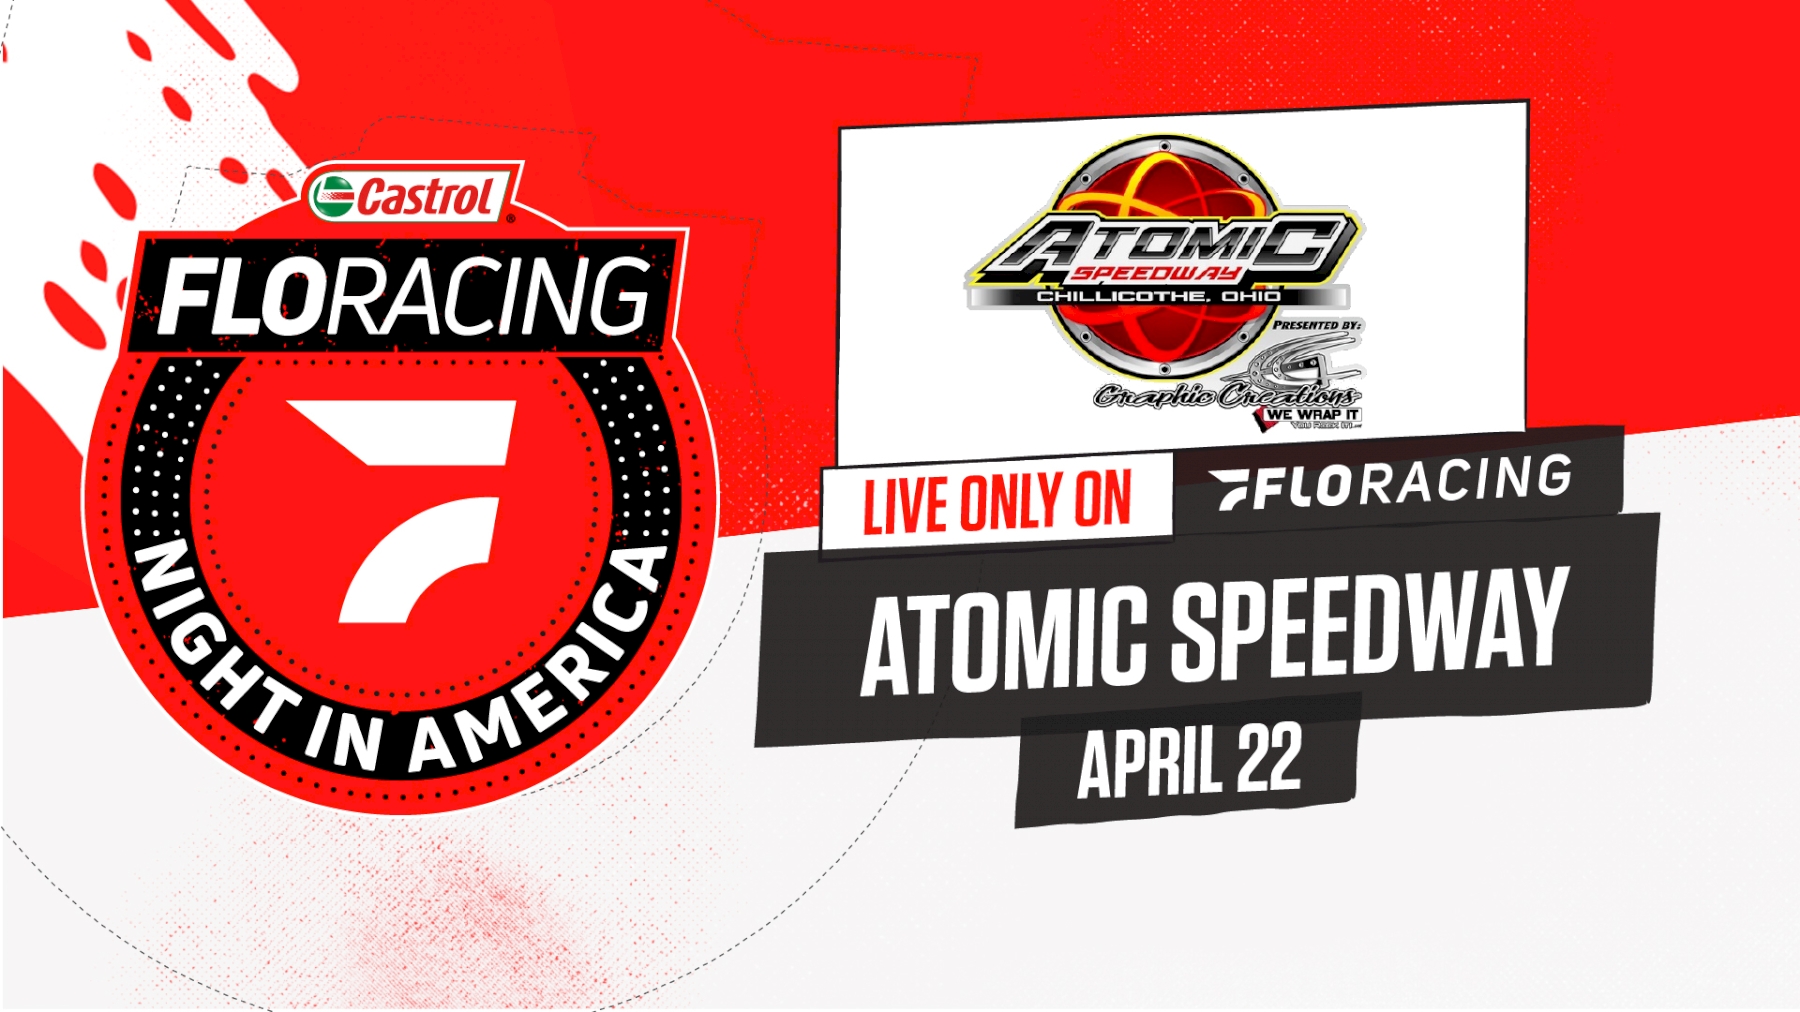 2021 Castrol FloRacing Night in America at Atomic Speedway - Schedule